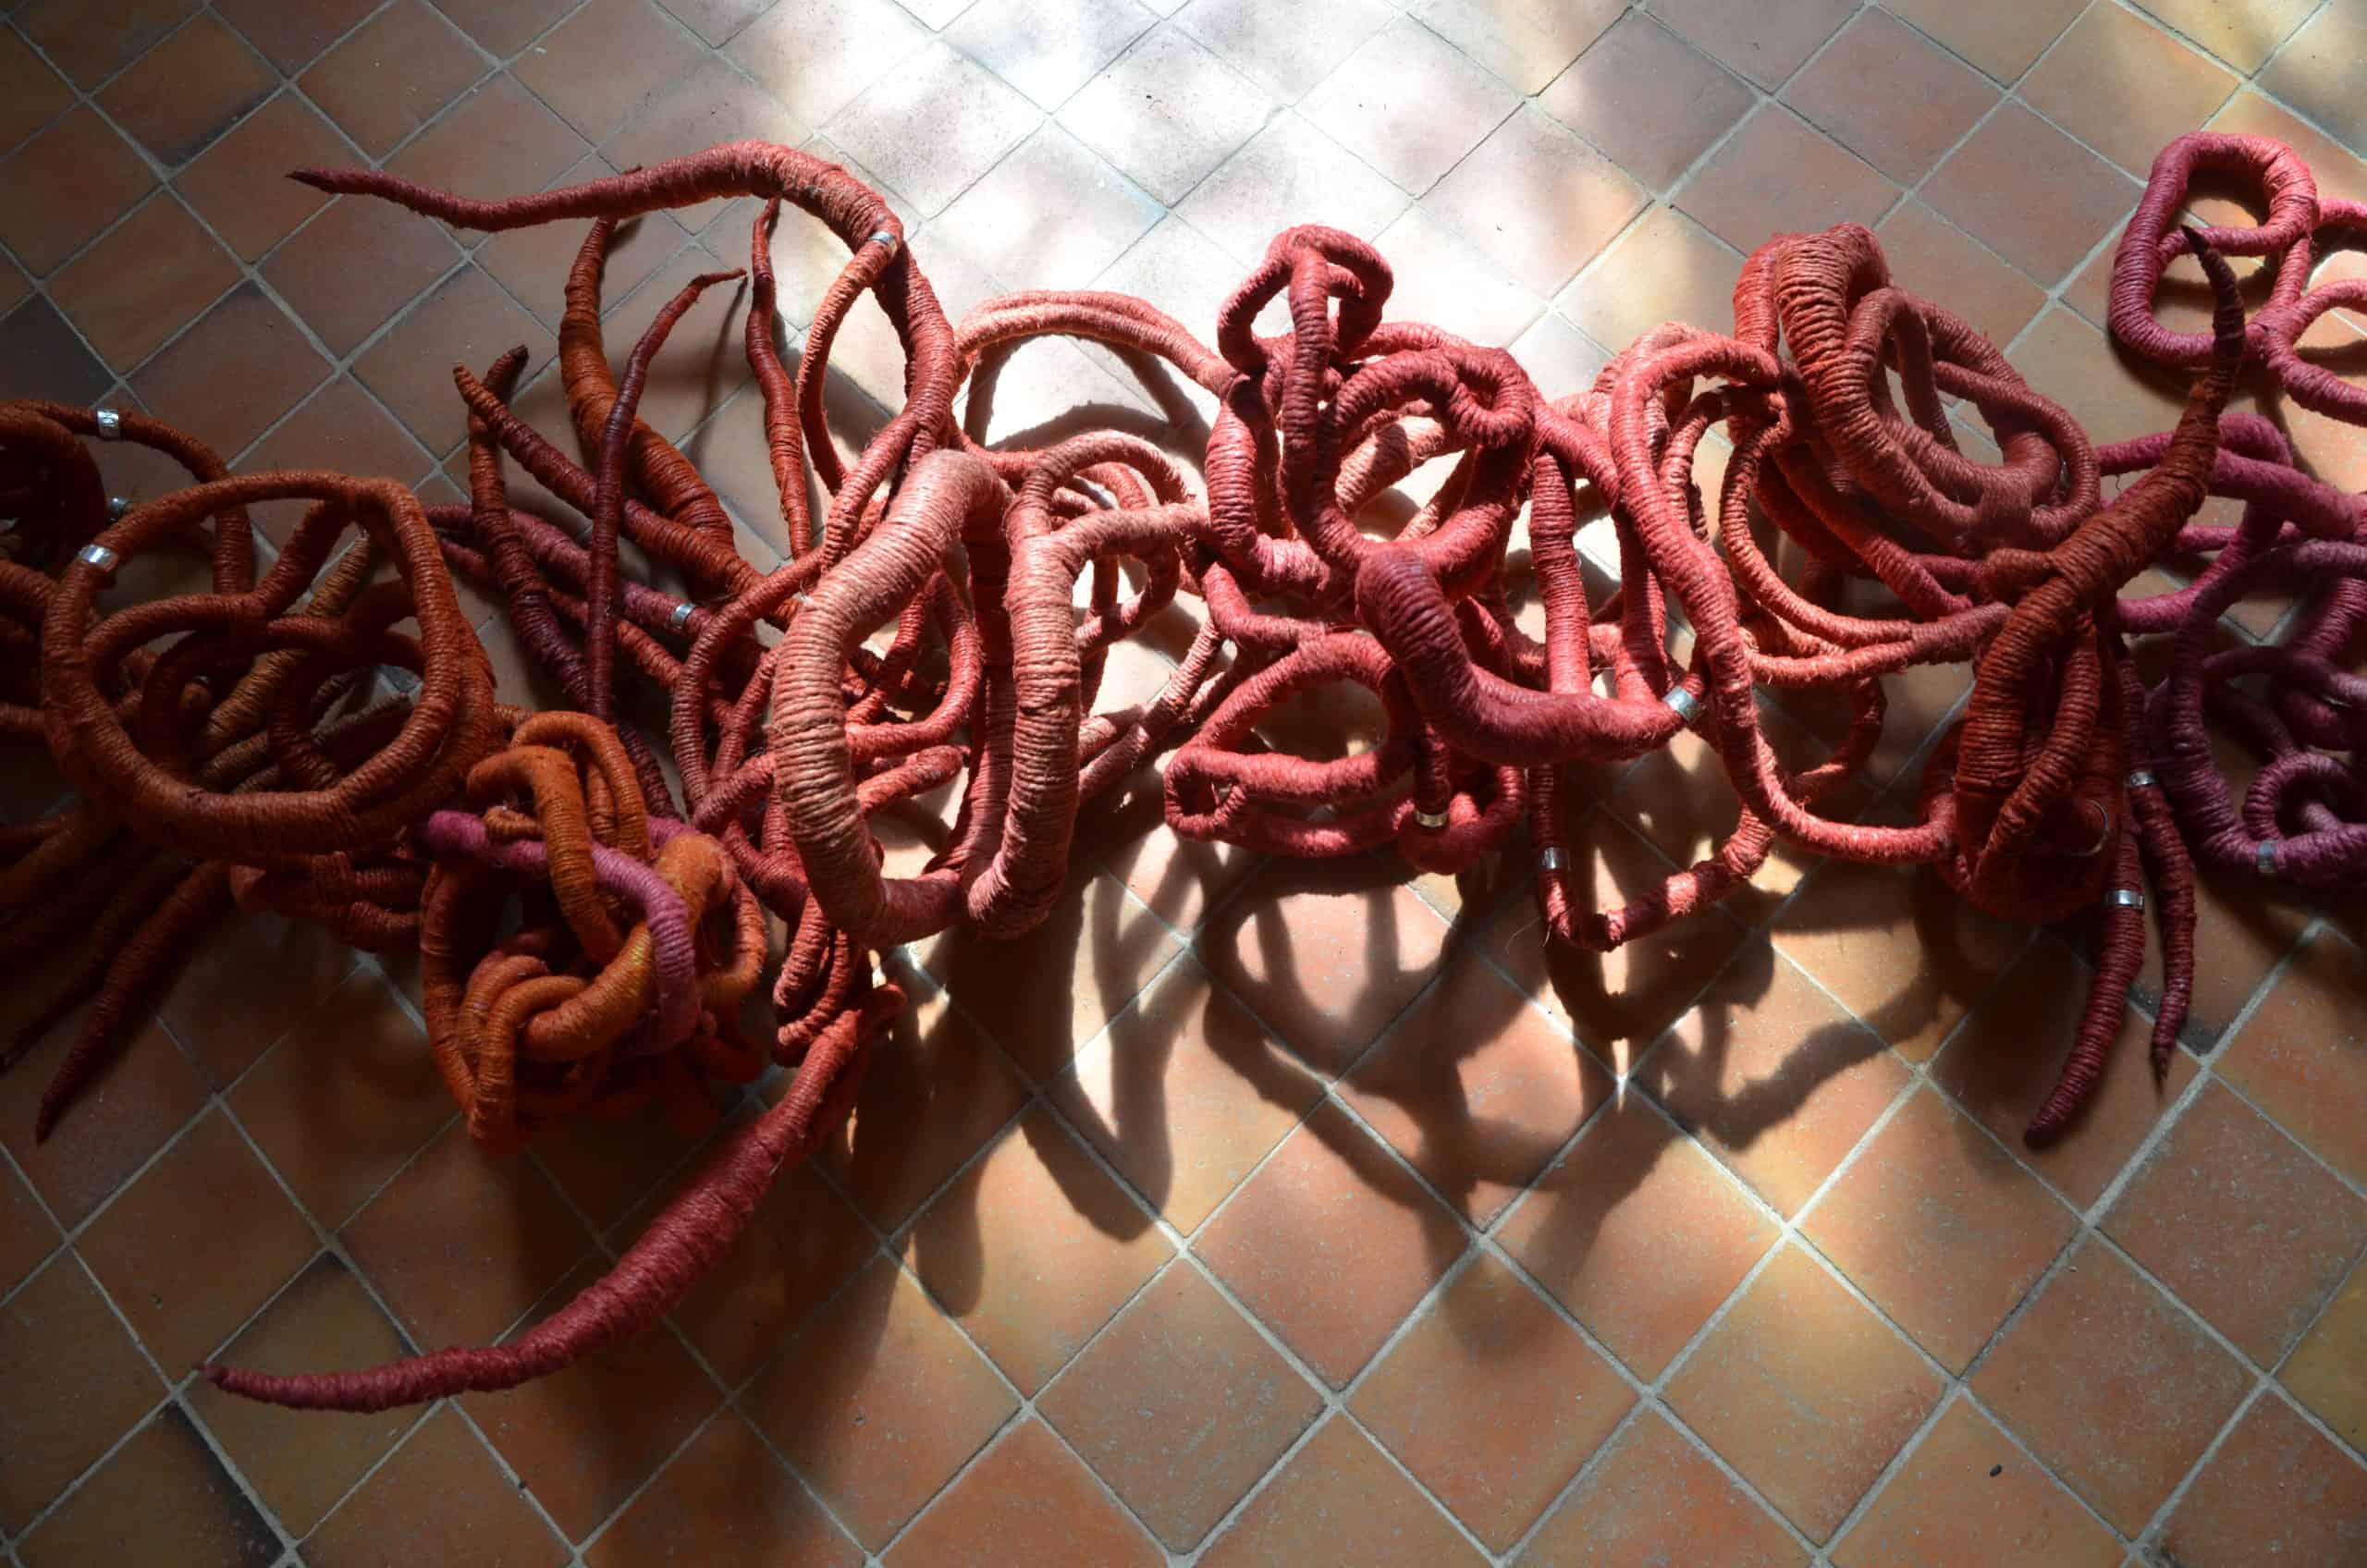 red sculptures by Aude Franjou, exhibition in Chapel in Vivoin, France